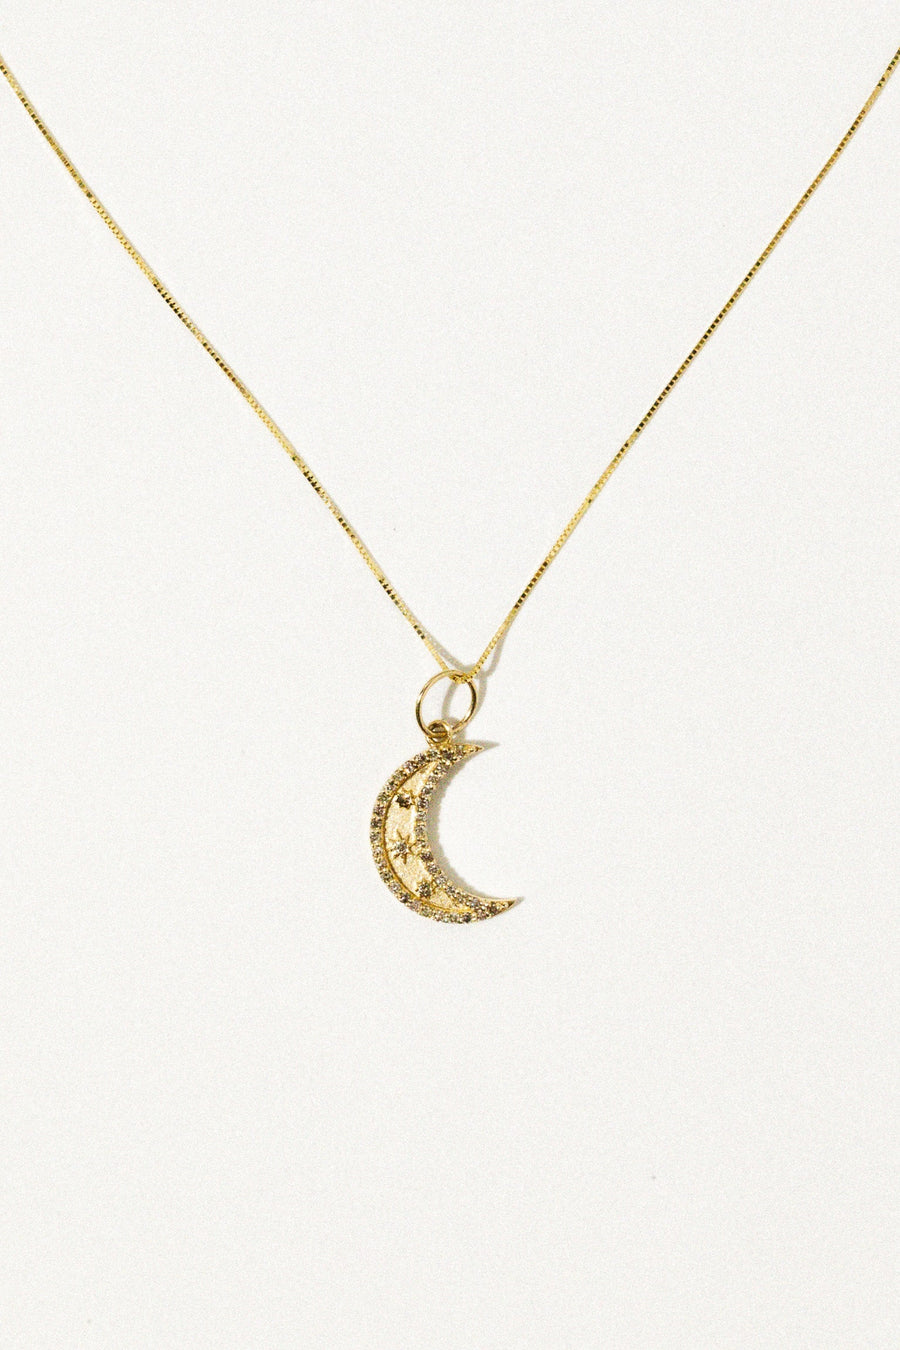 Stuller Jewelry Gold / 16 Inches 14kt New Moon Diamond Necklace